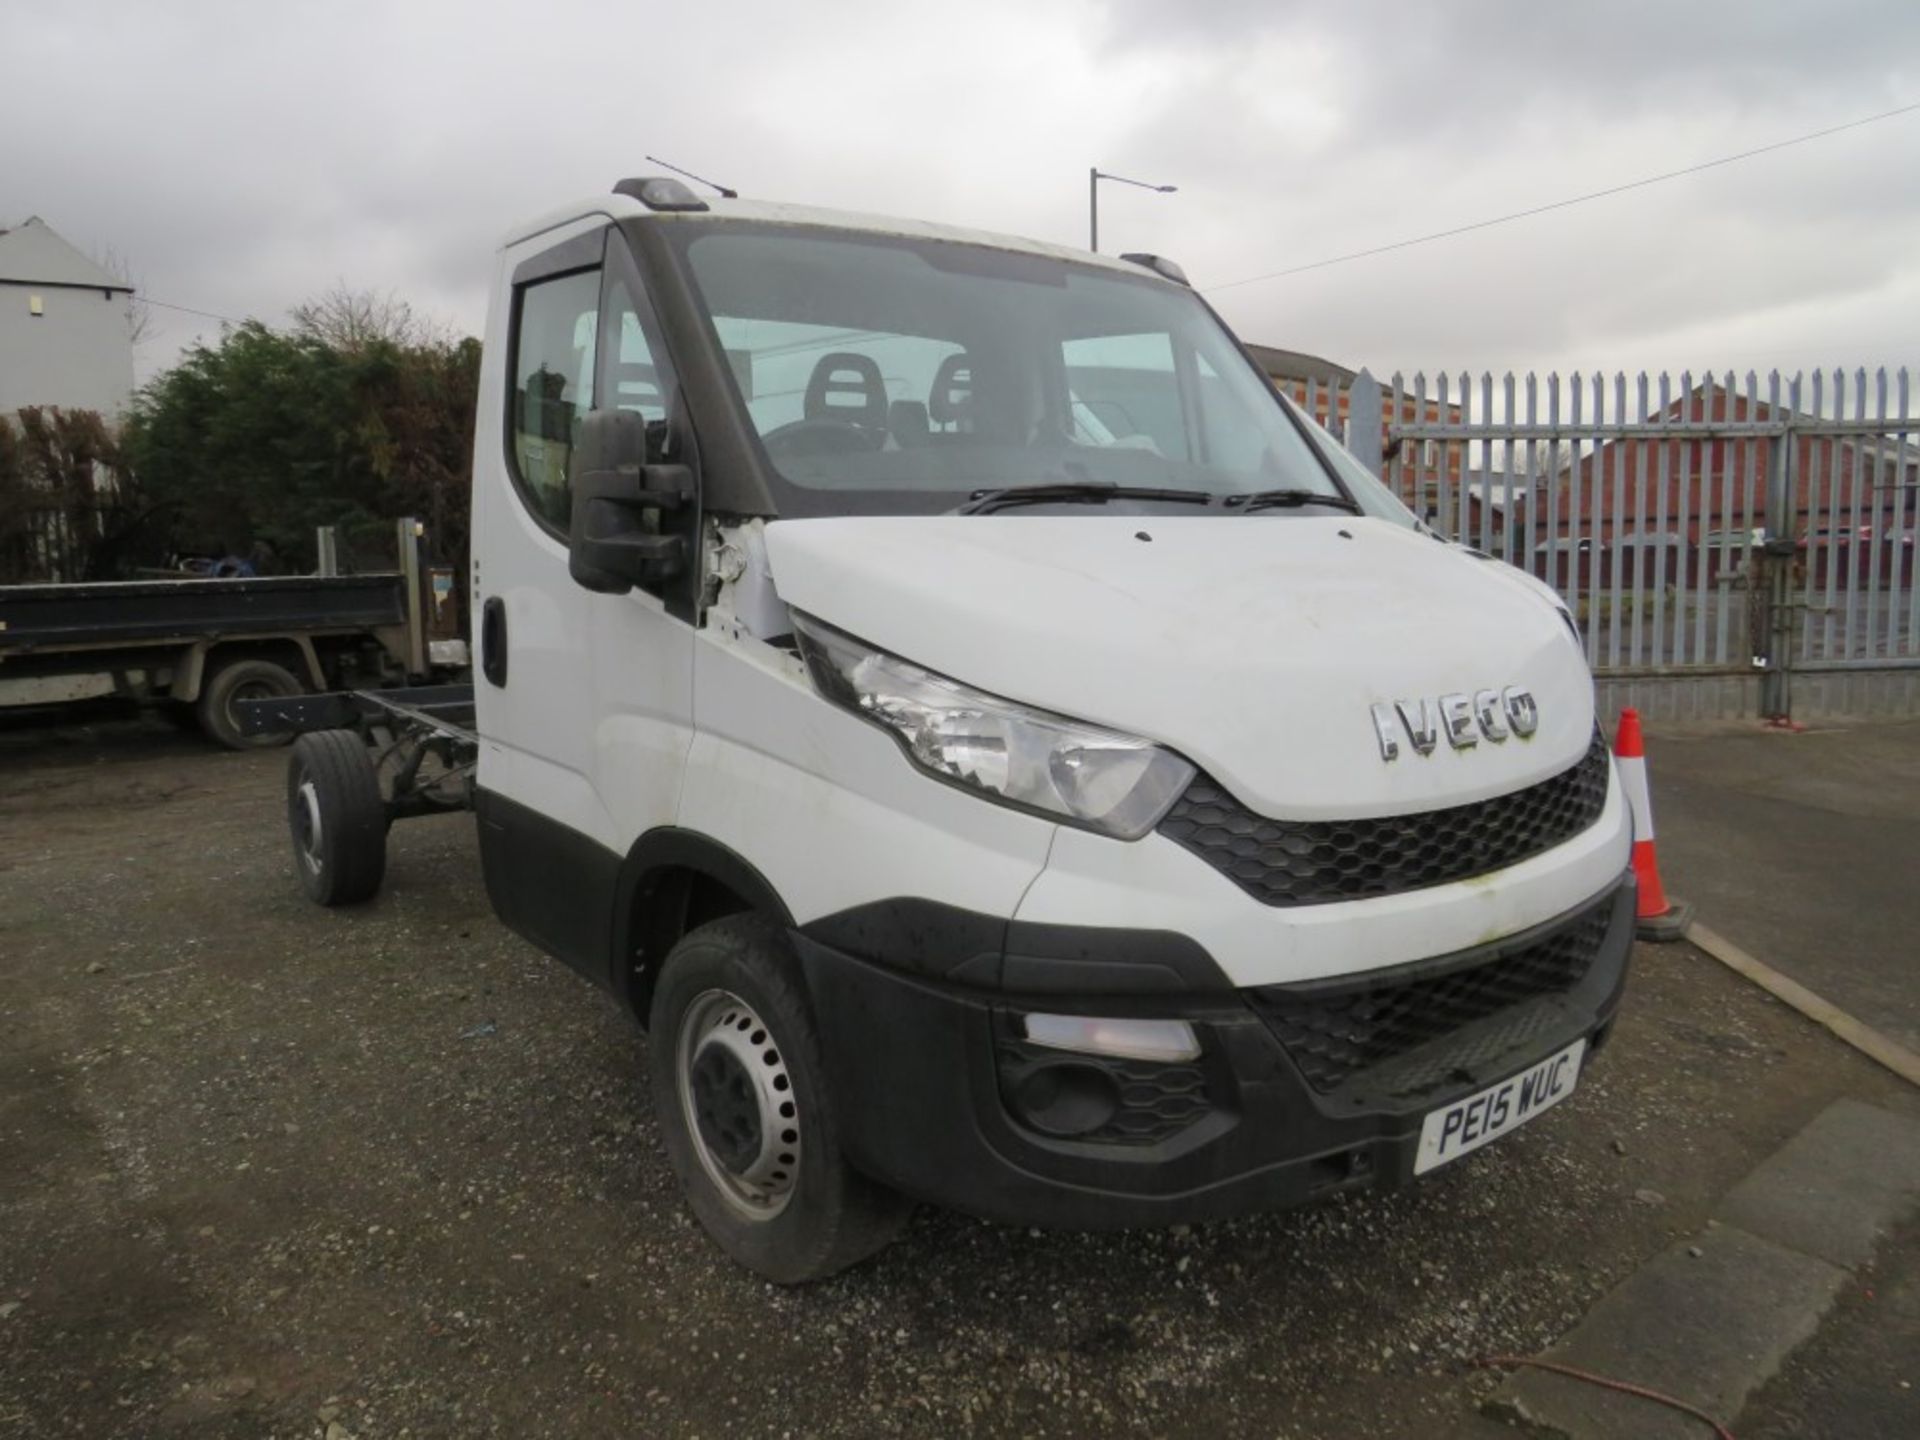 15 reg IVECO DAILY 35S13 LWB CHASSIS CAB (NON RUNNER) 1ST REG 04/15, 5000M ONLY WARRANTED, V5